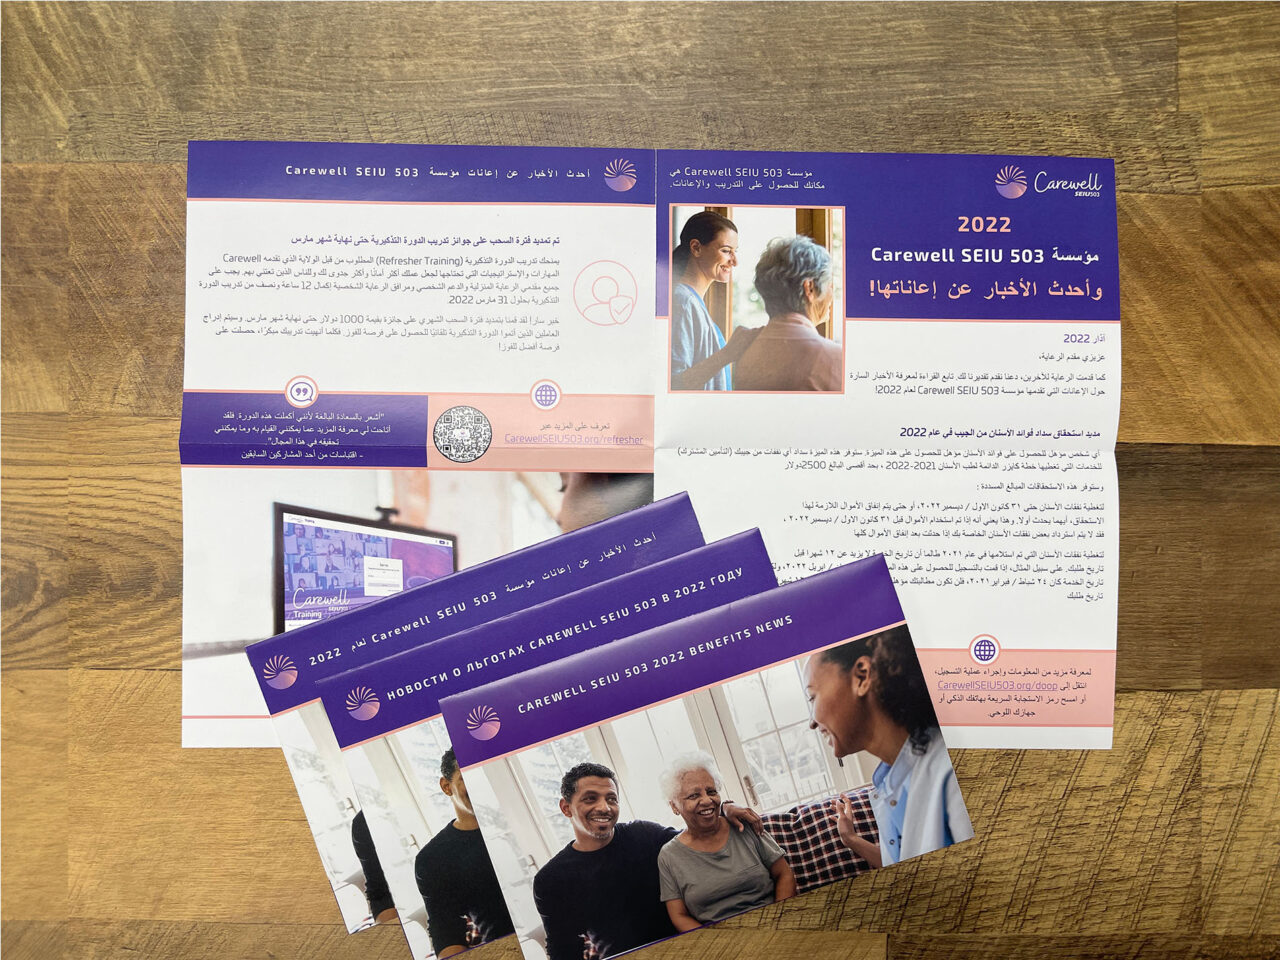 Example of Morel's print and direct mail capabilities, showing a branded brochure printed in multiple languages.